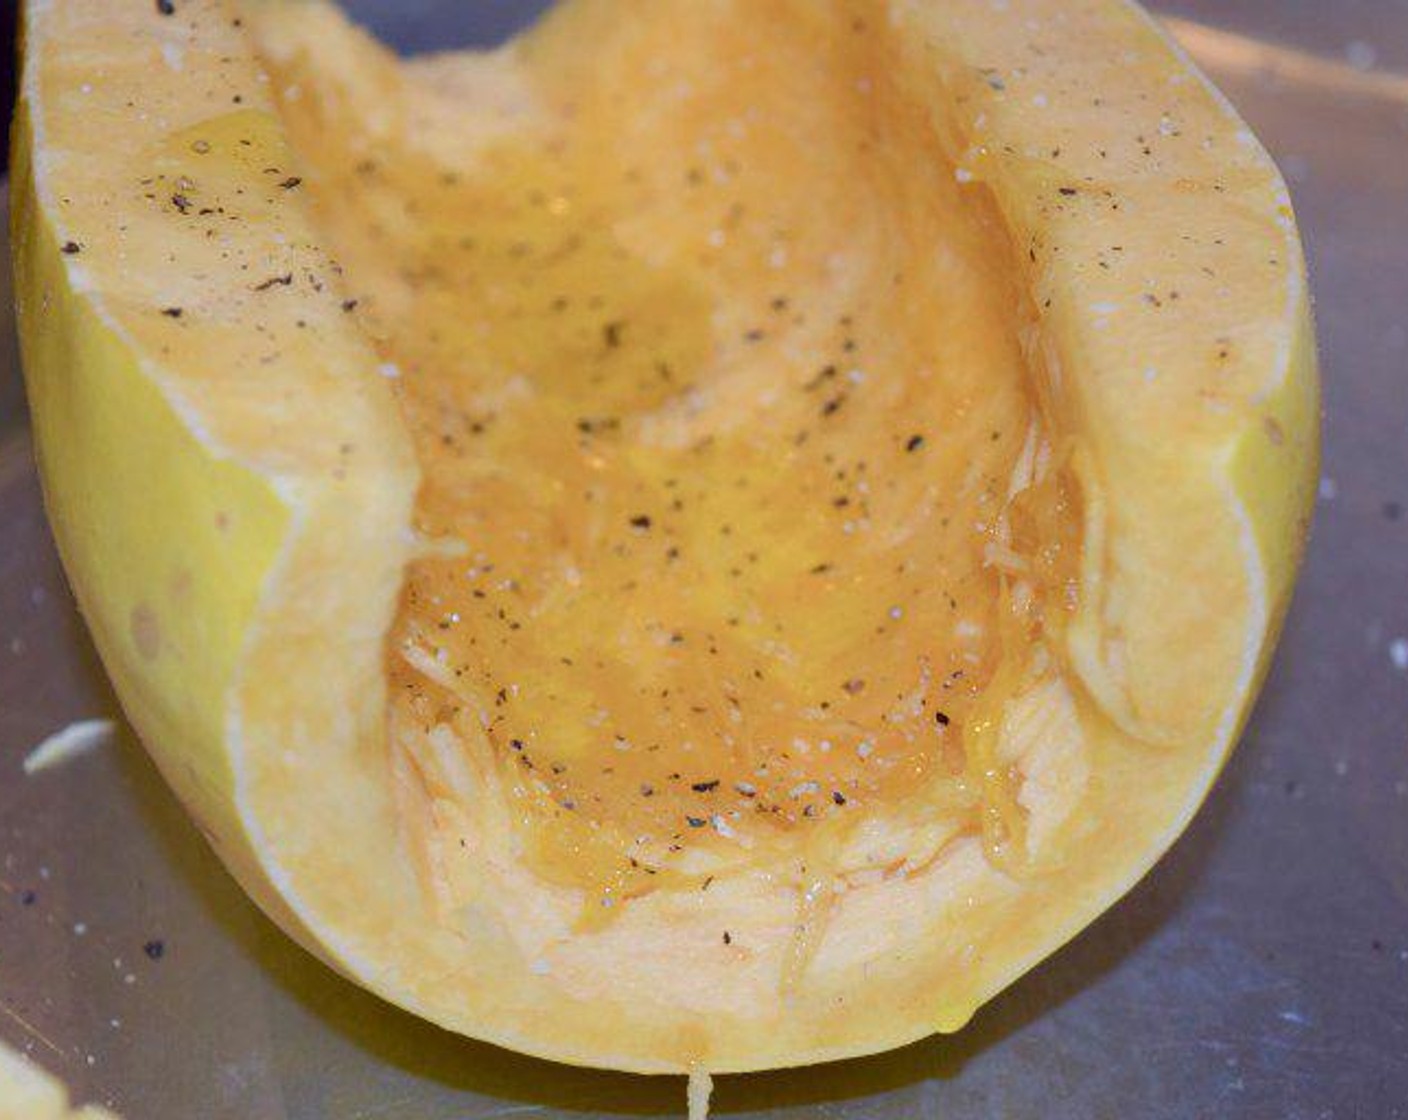 step 3 With a spoon, remove the seeds from each half. Drizzle each half with Extra-Virgin Olive Oil (1 Tbsp) and season with Salt (1/4 tsp) and Ground Black Pepper (1/2 Tbsp). Place squash face side down on a baking sheet and cook for 45 minutes, or until fork tender.